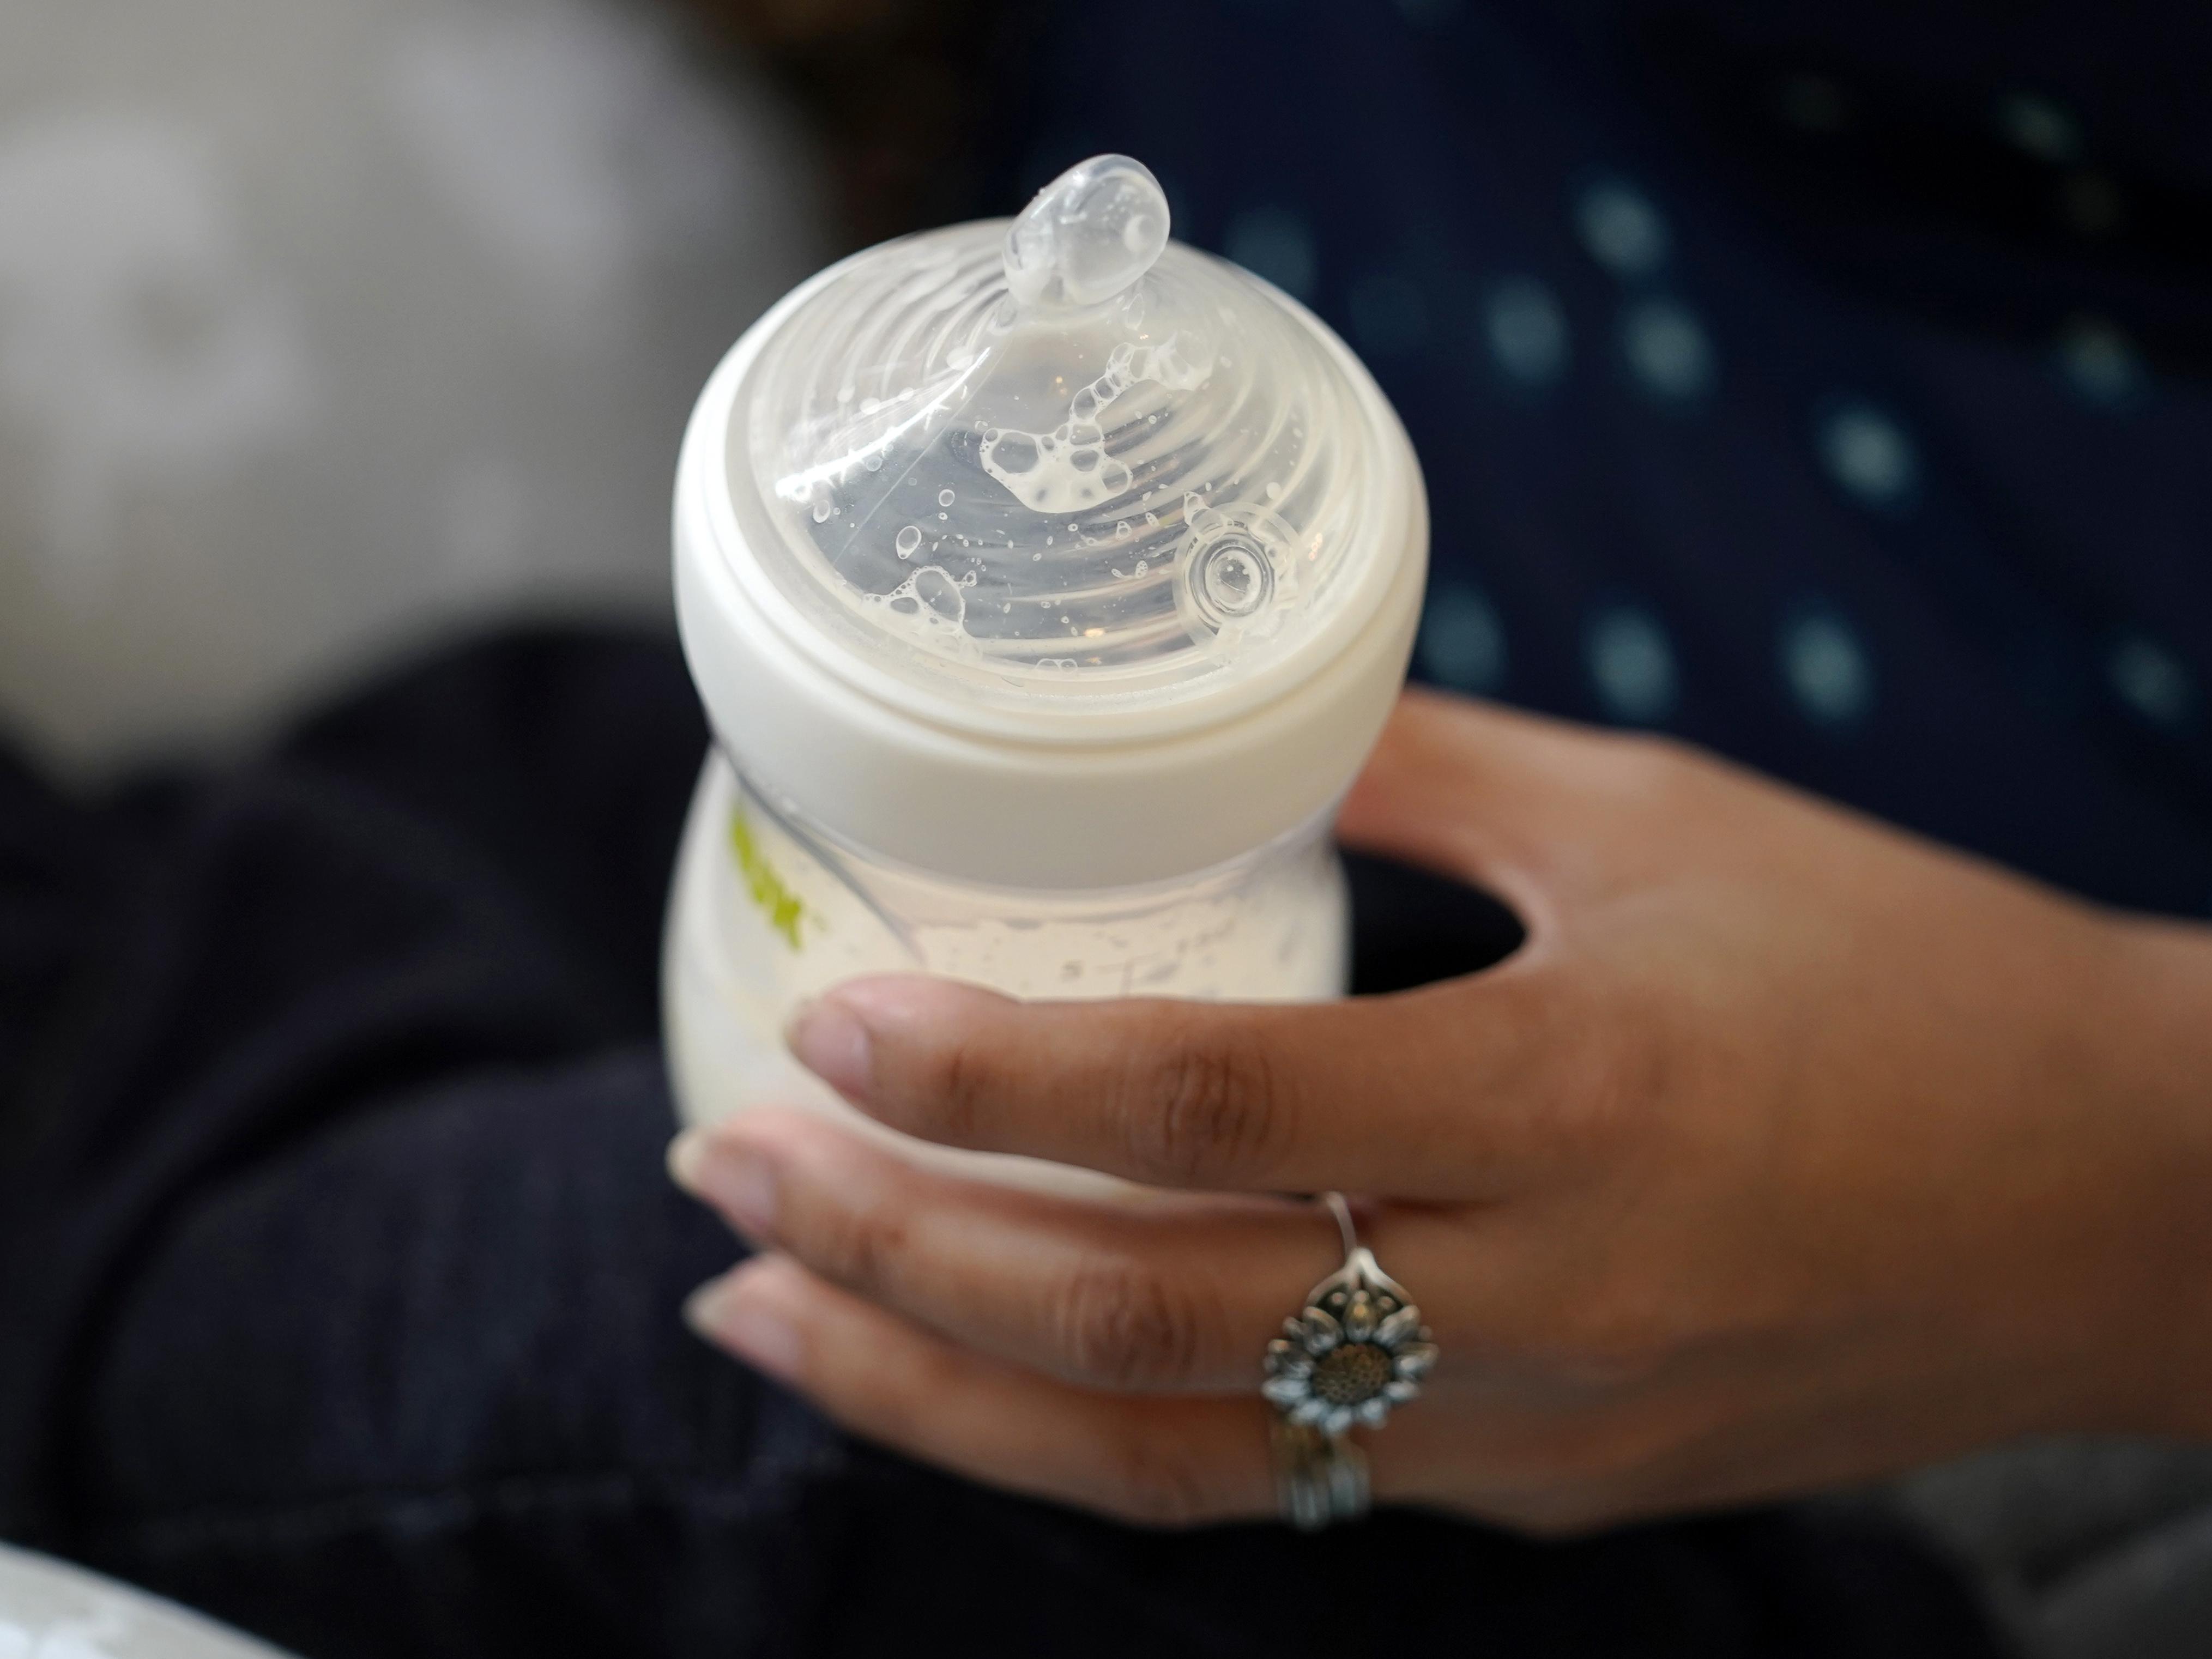 Best Of Insight” Infant Formula Shortage Study Mayor Sheng Thao is First Hmong to lead Major U.S